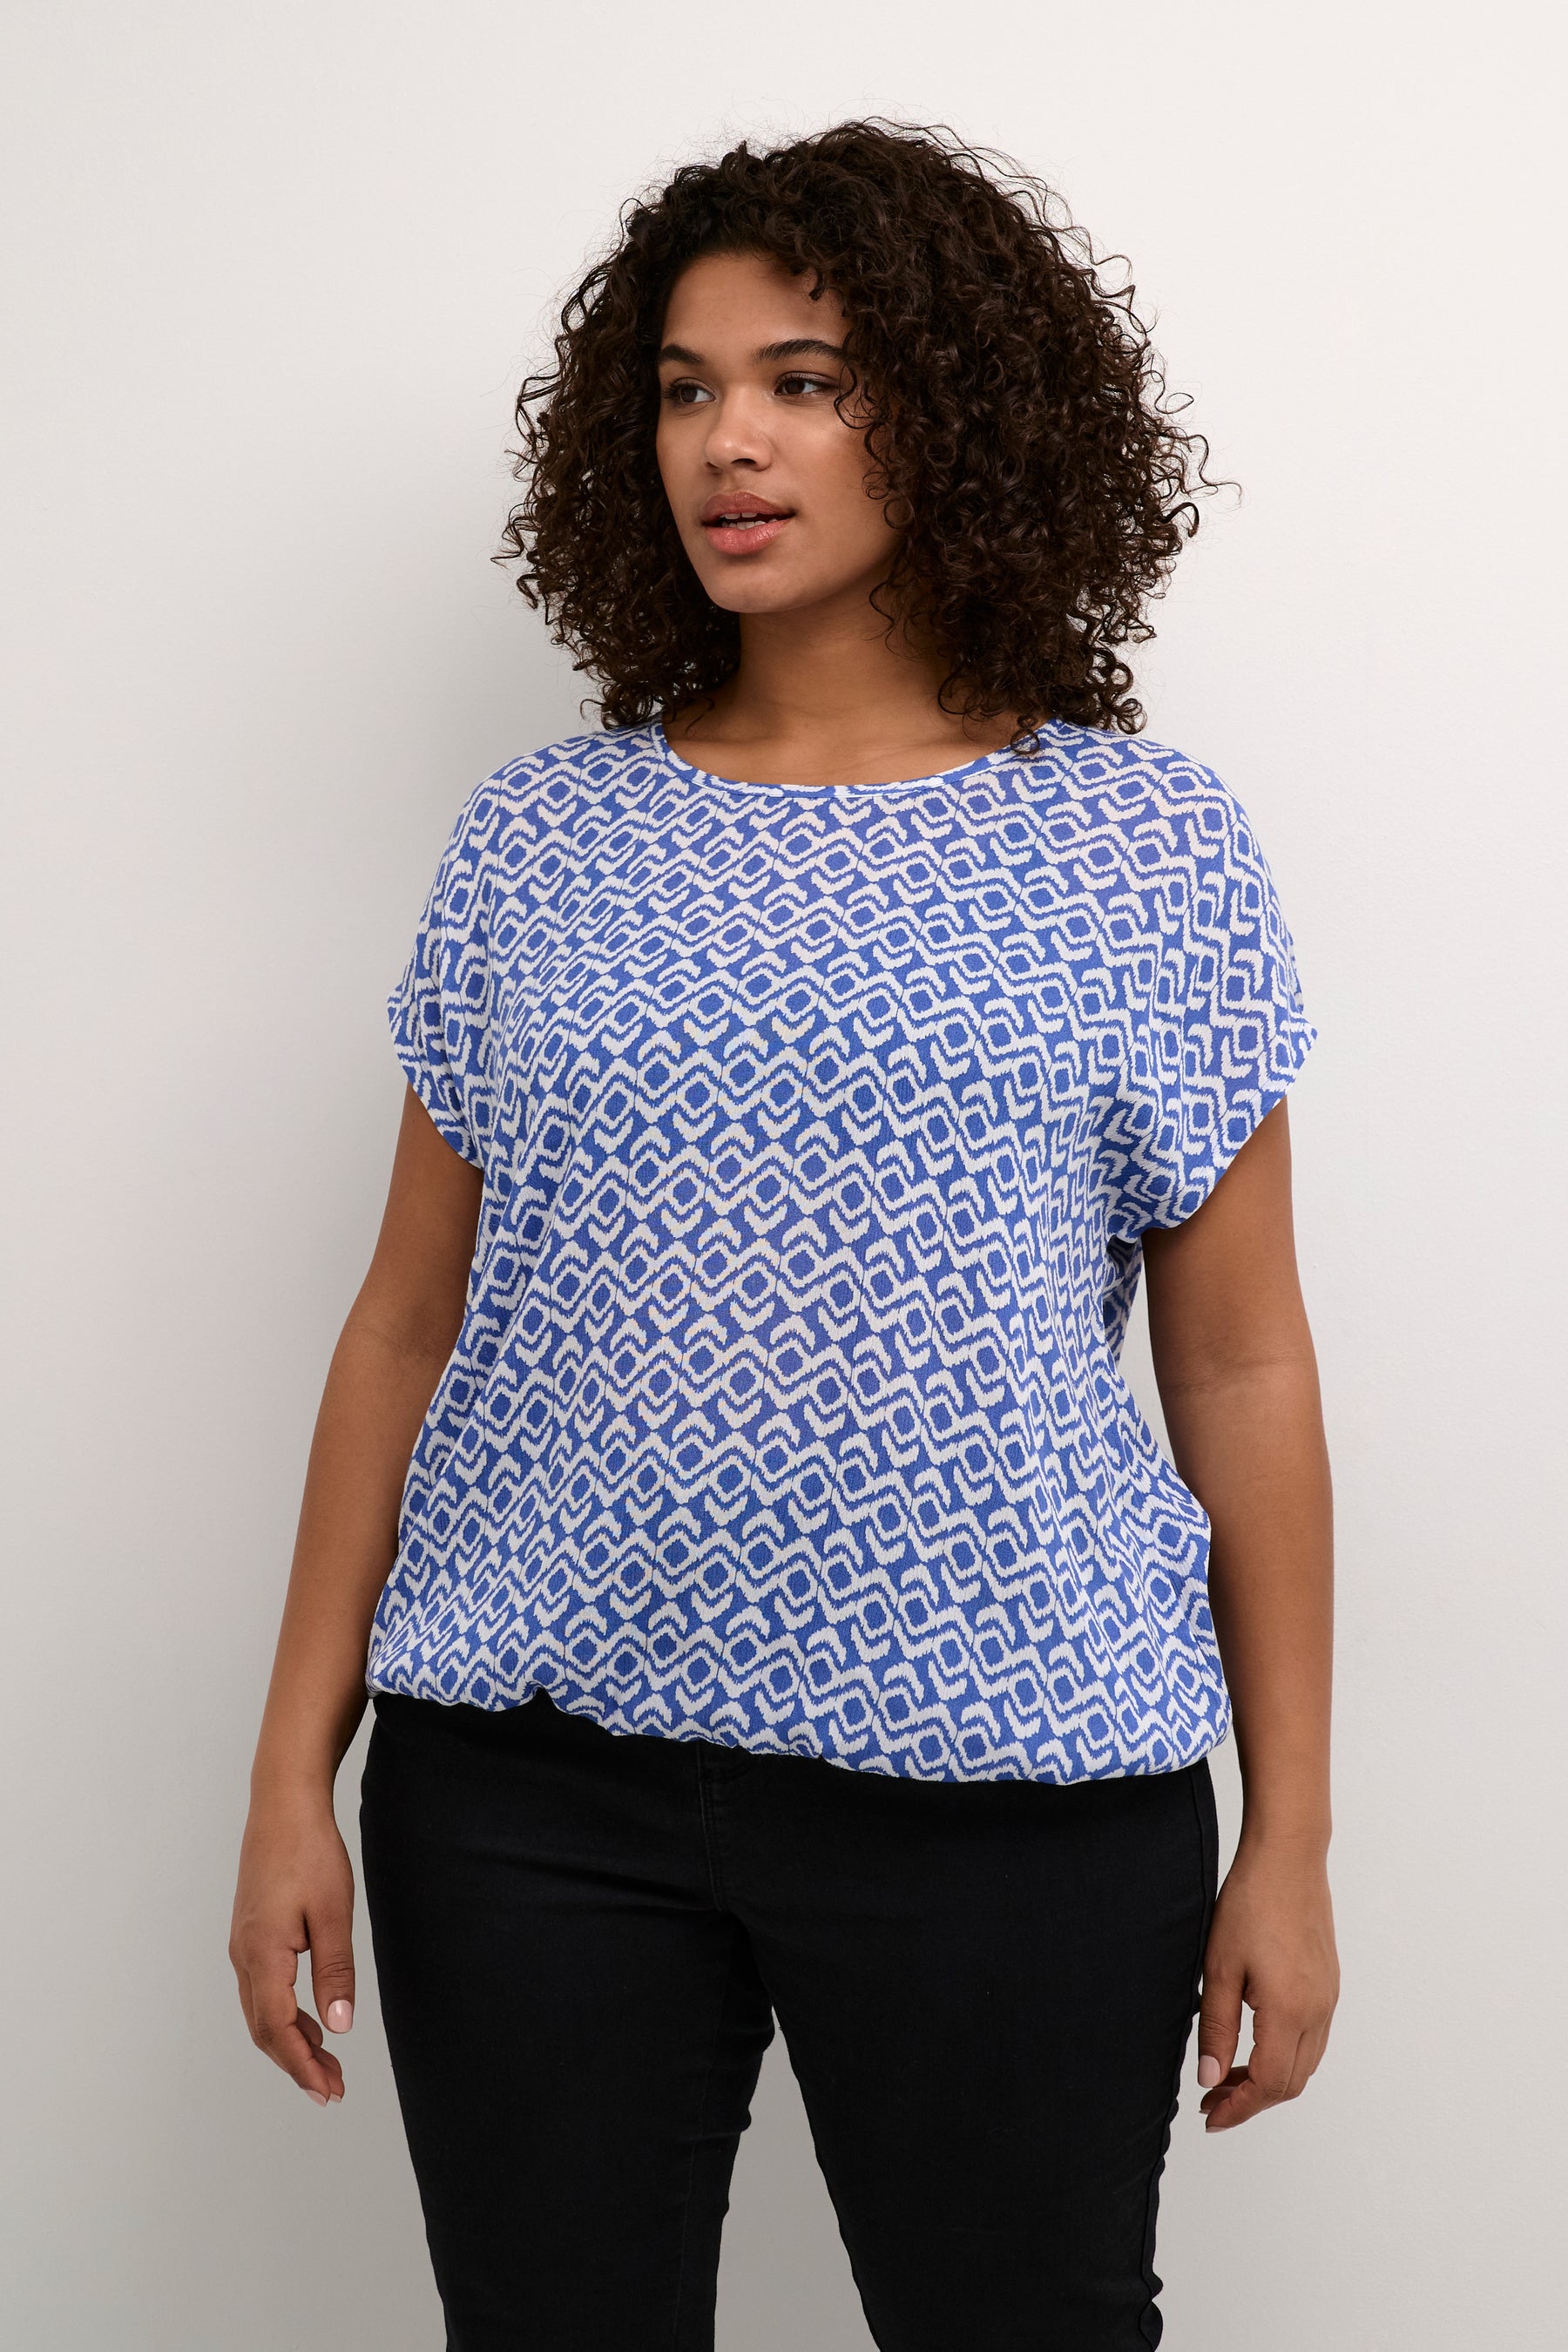 Kaffe Curve Stanley Blouse in Graphic Blue